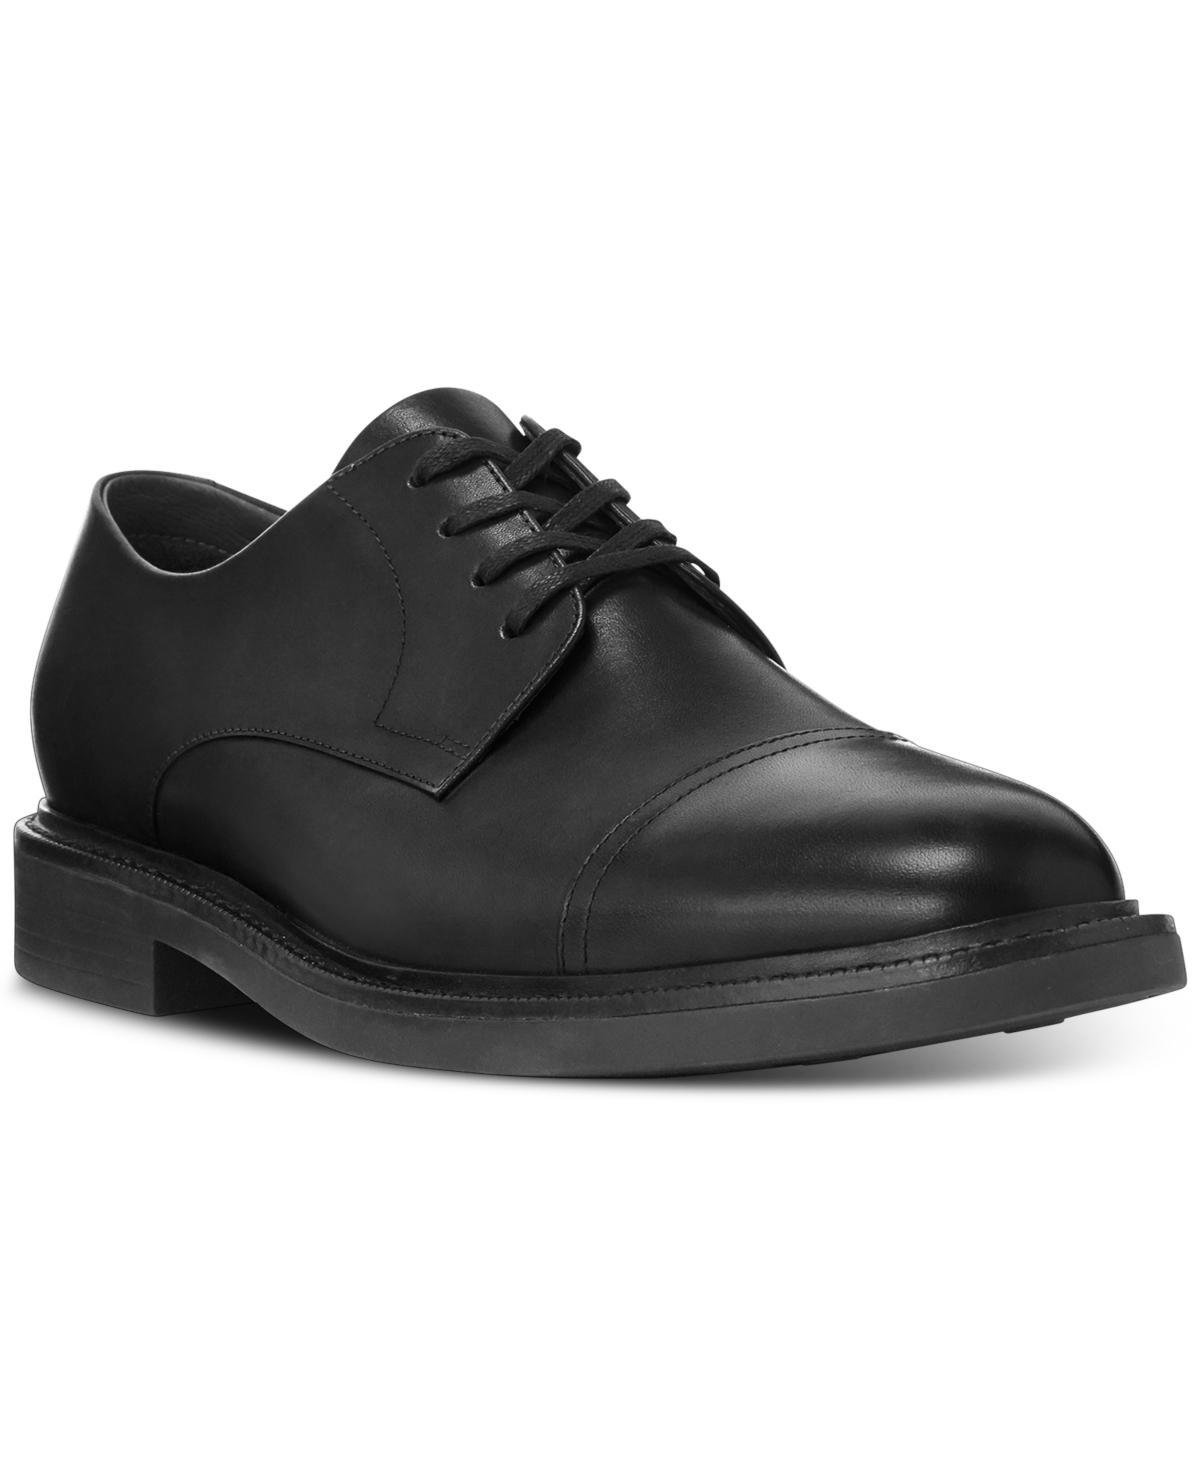 Polo Ralph Lauren Mens Asher Cap Toe Leather Oxfords Product Image